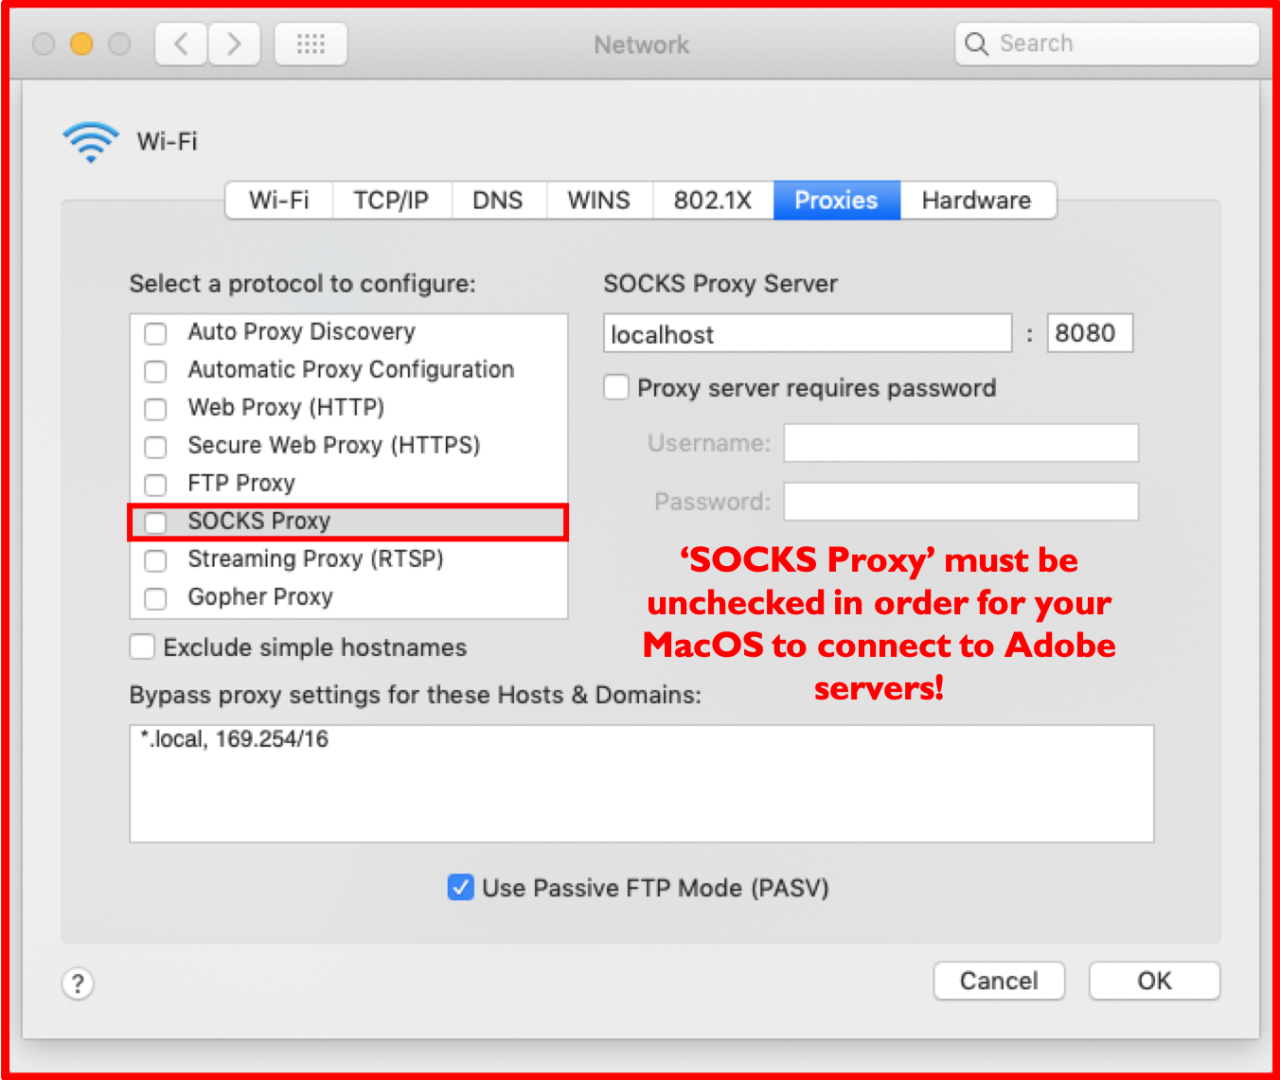 search for adobe cc leftover files mac os